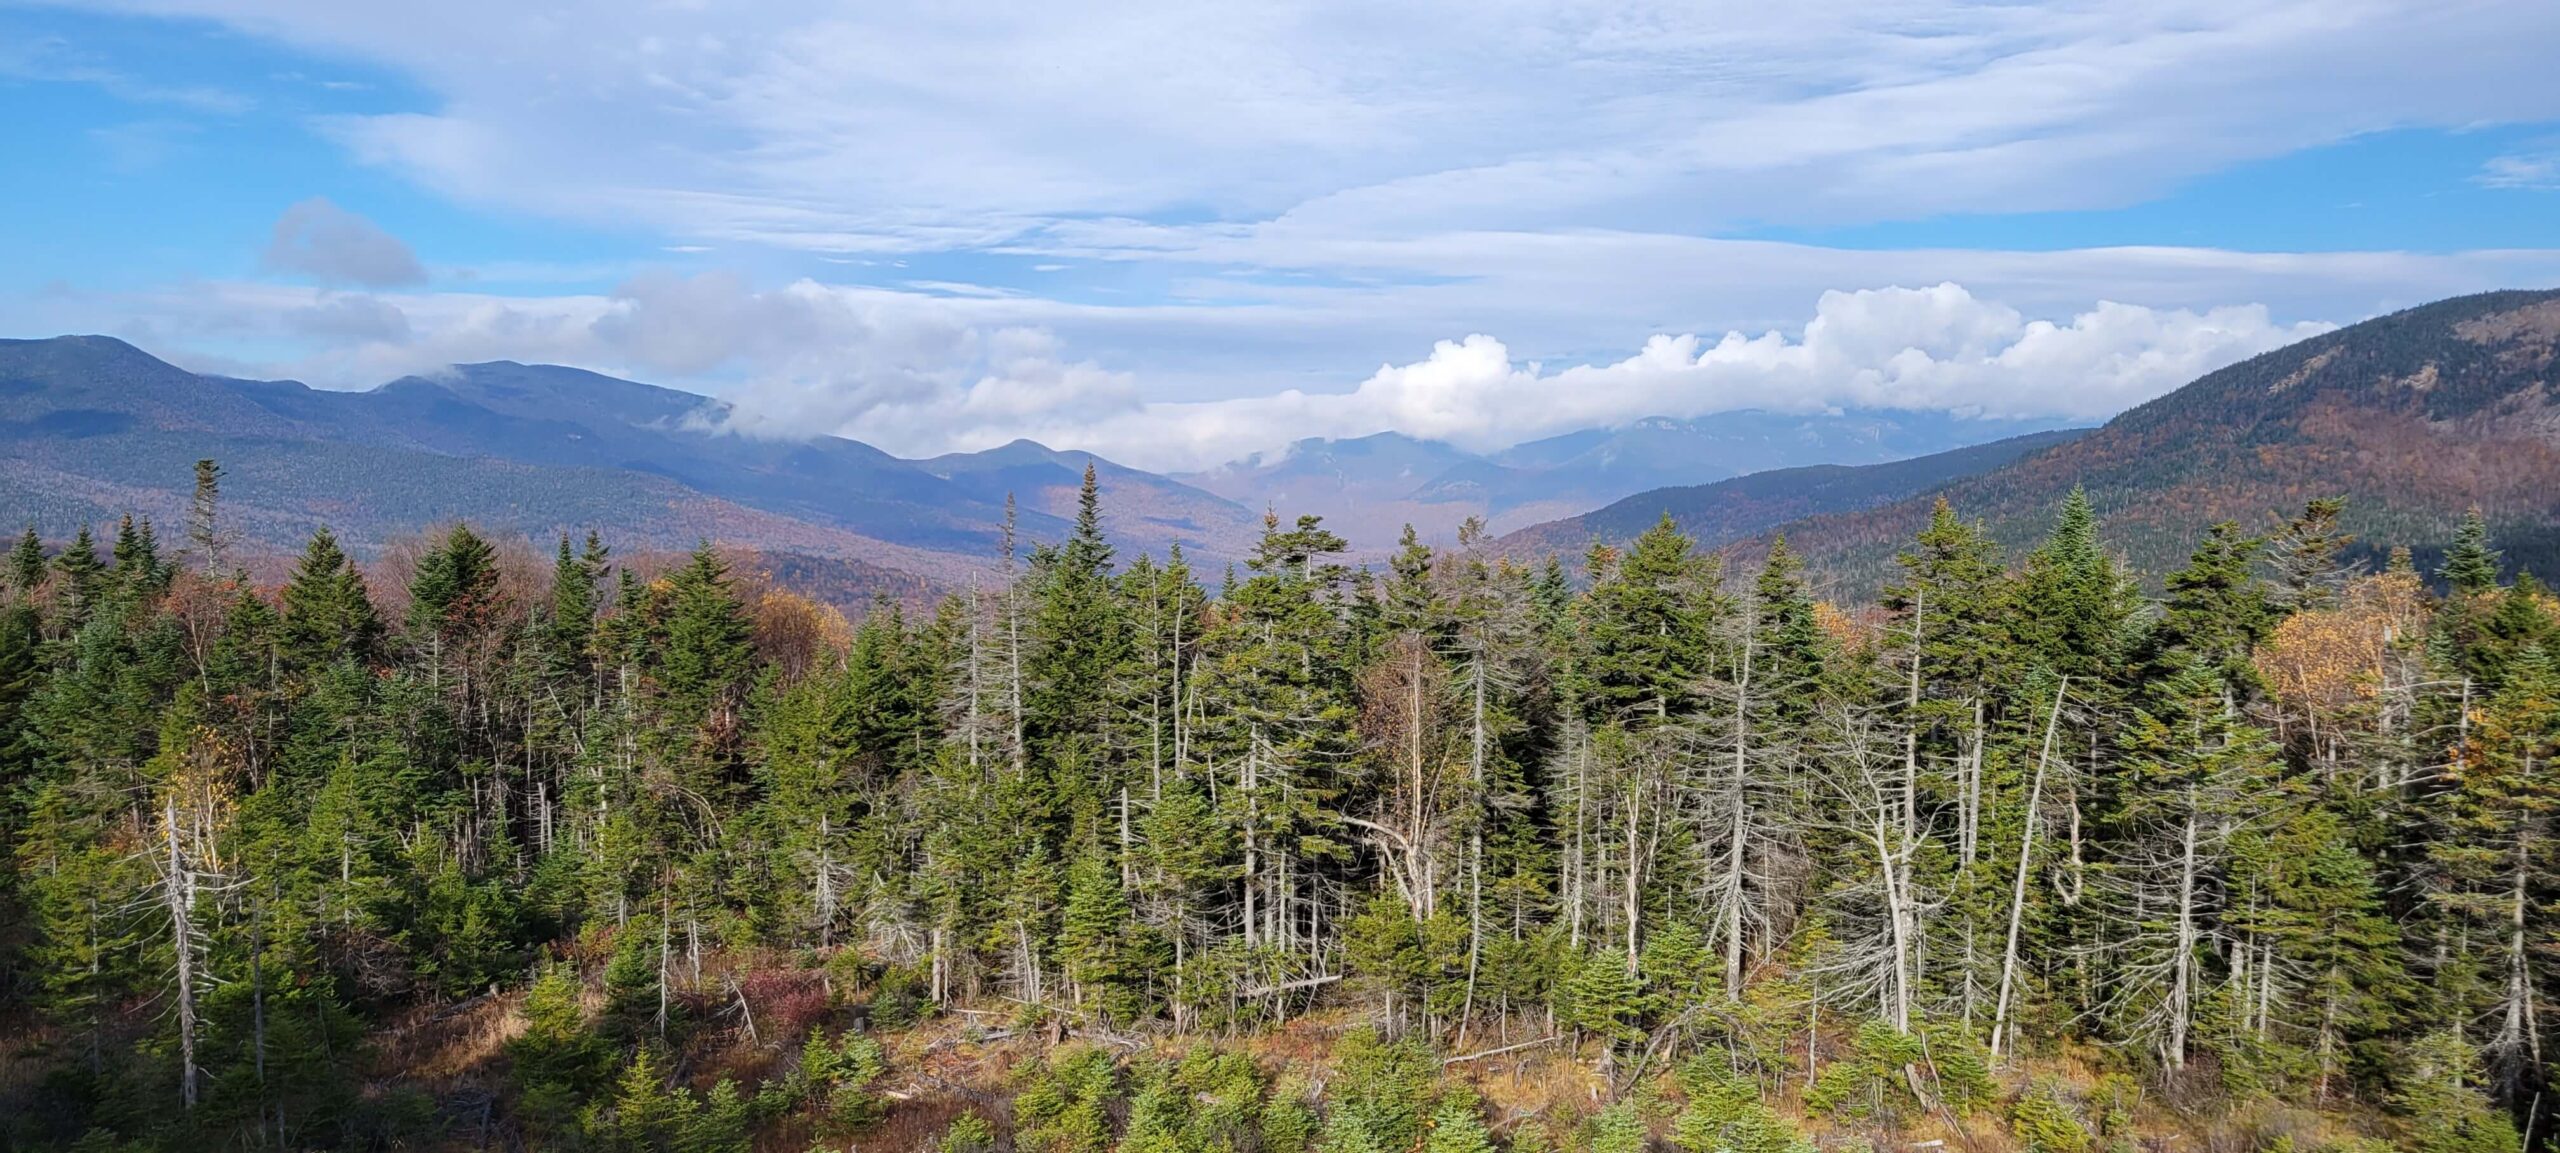 Best Fall Foliage Stops White Mountains NH: Kancamagus Highway 